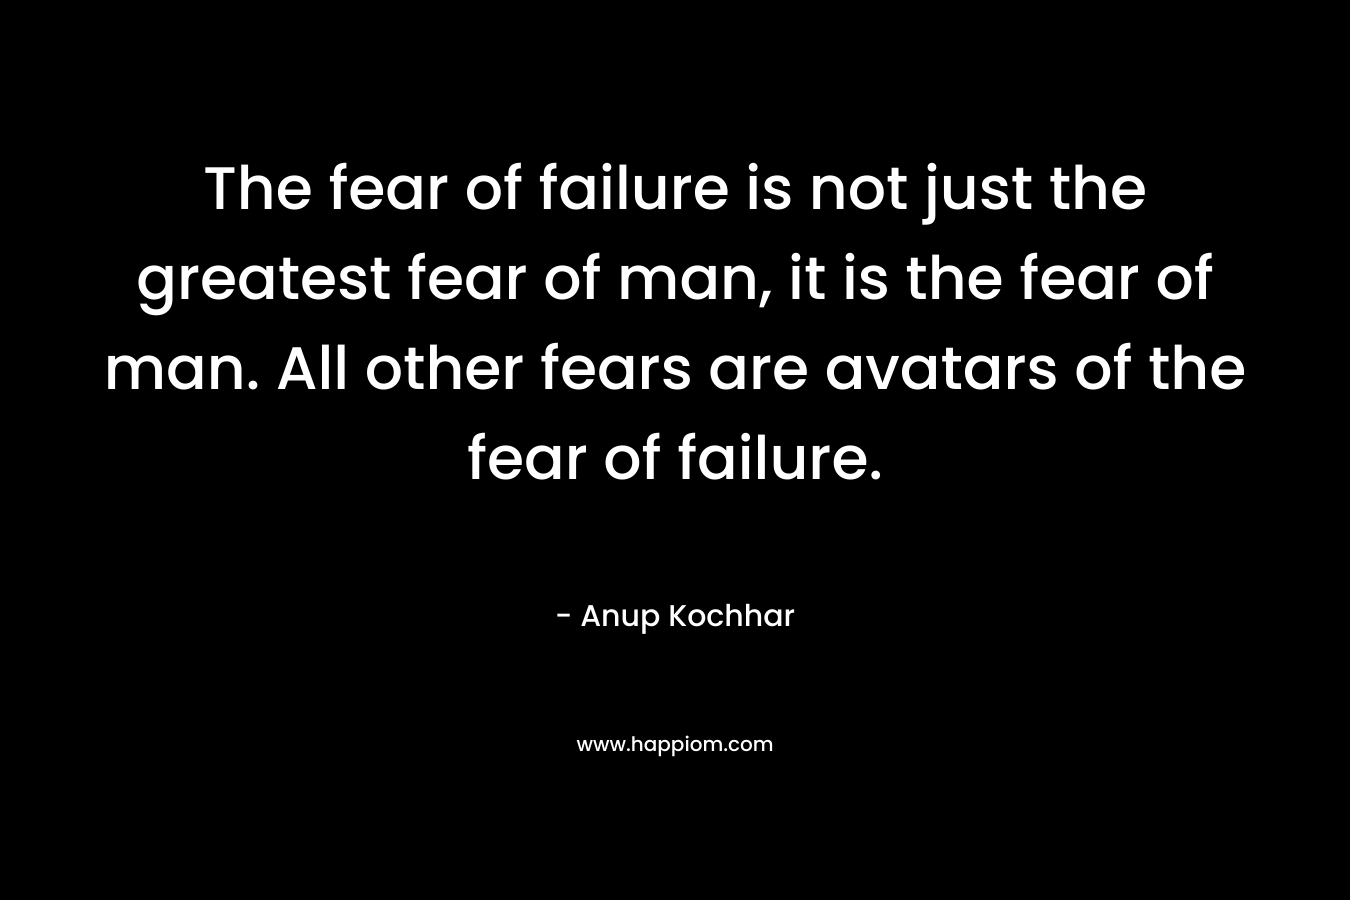 The fear of failure is not just the greatest fear of man, it is the fear of man. All other fears are avatars of the fear of failure.